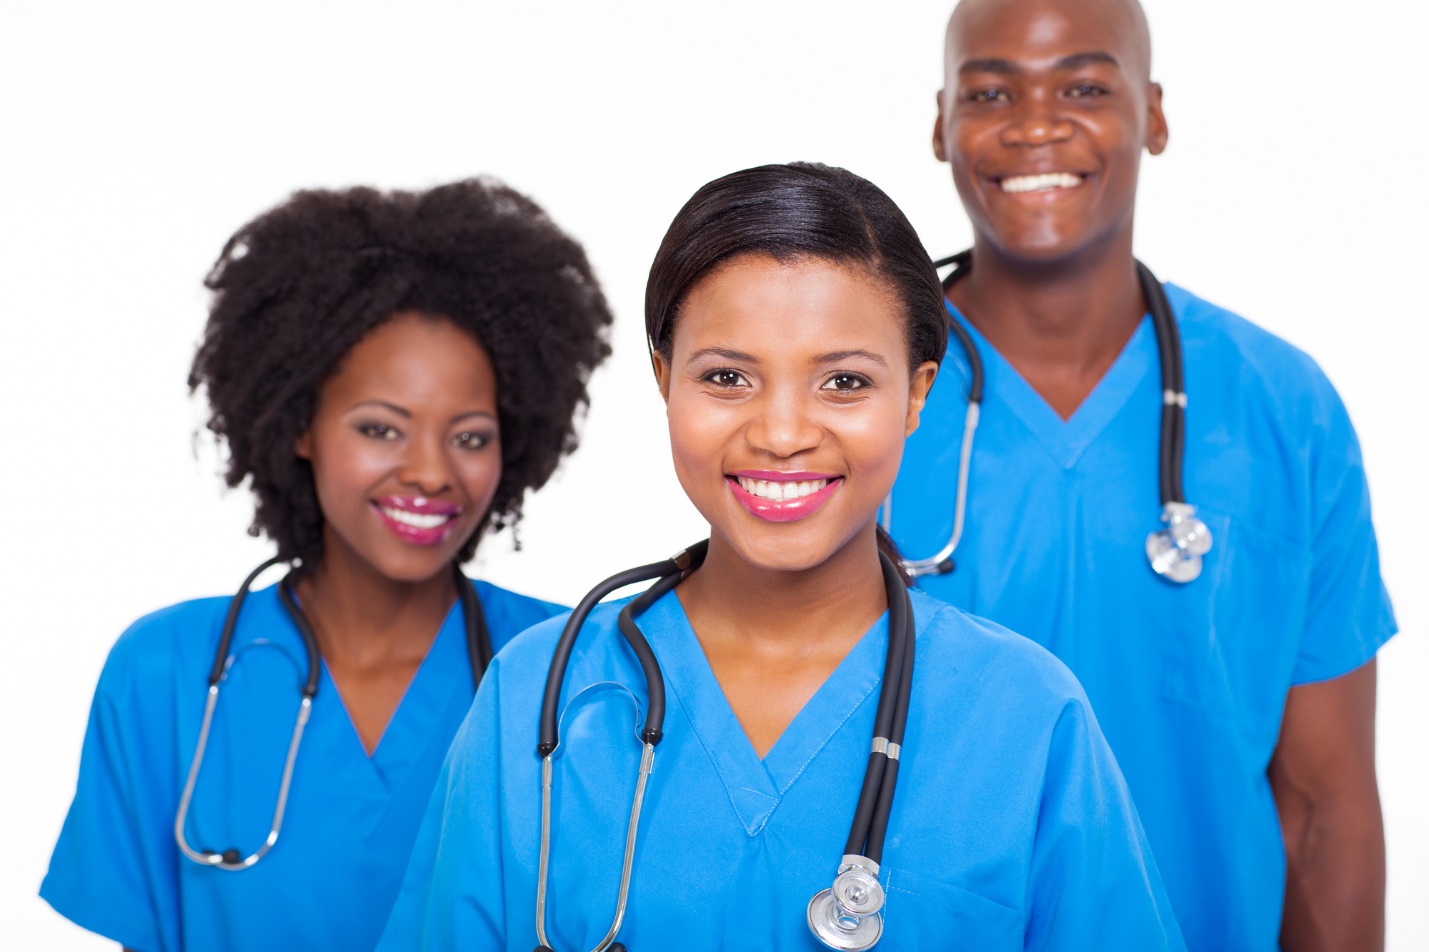 A group of medical professionals smiling

Description automatically generated